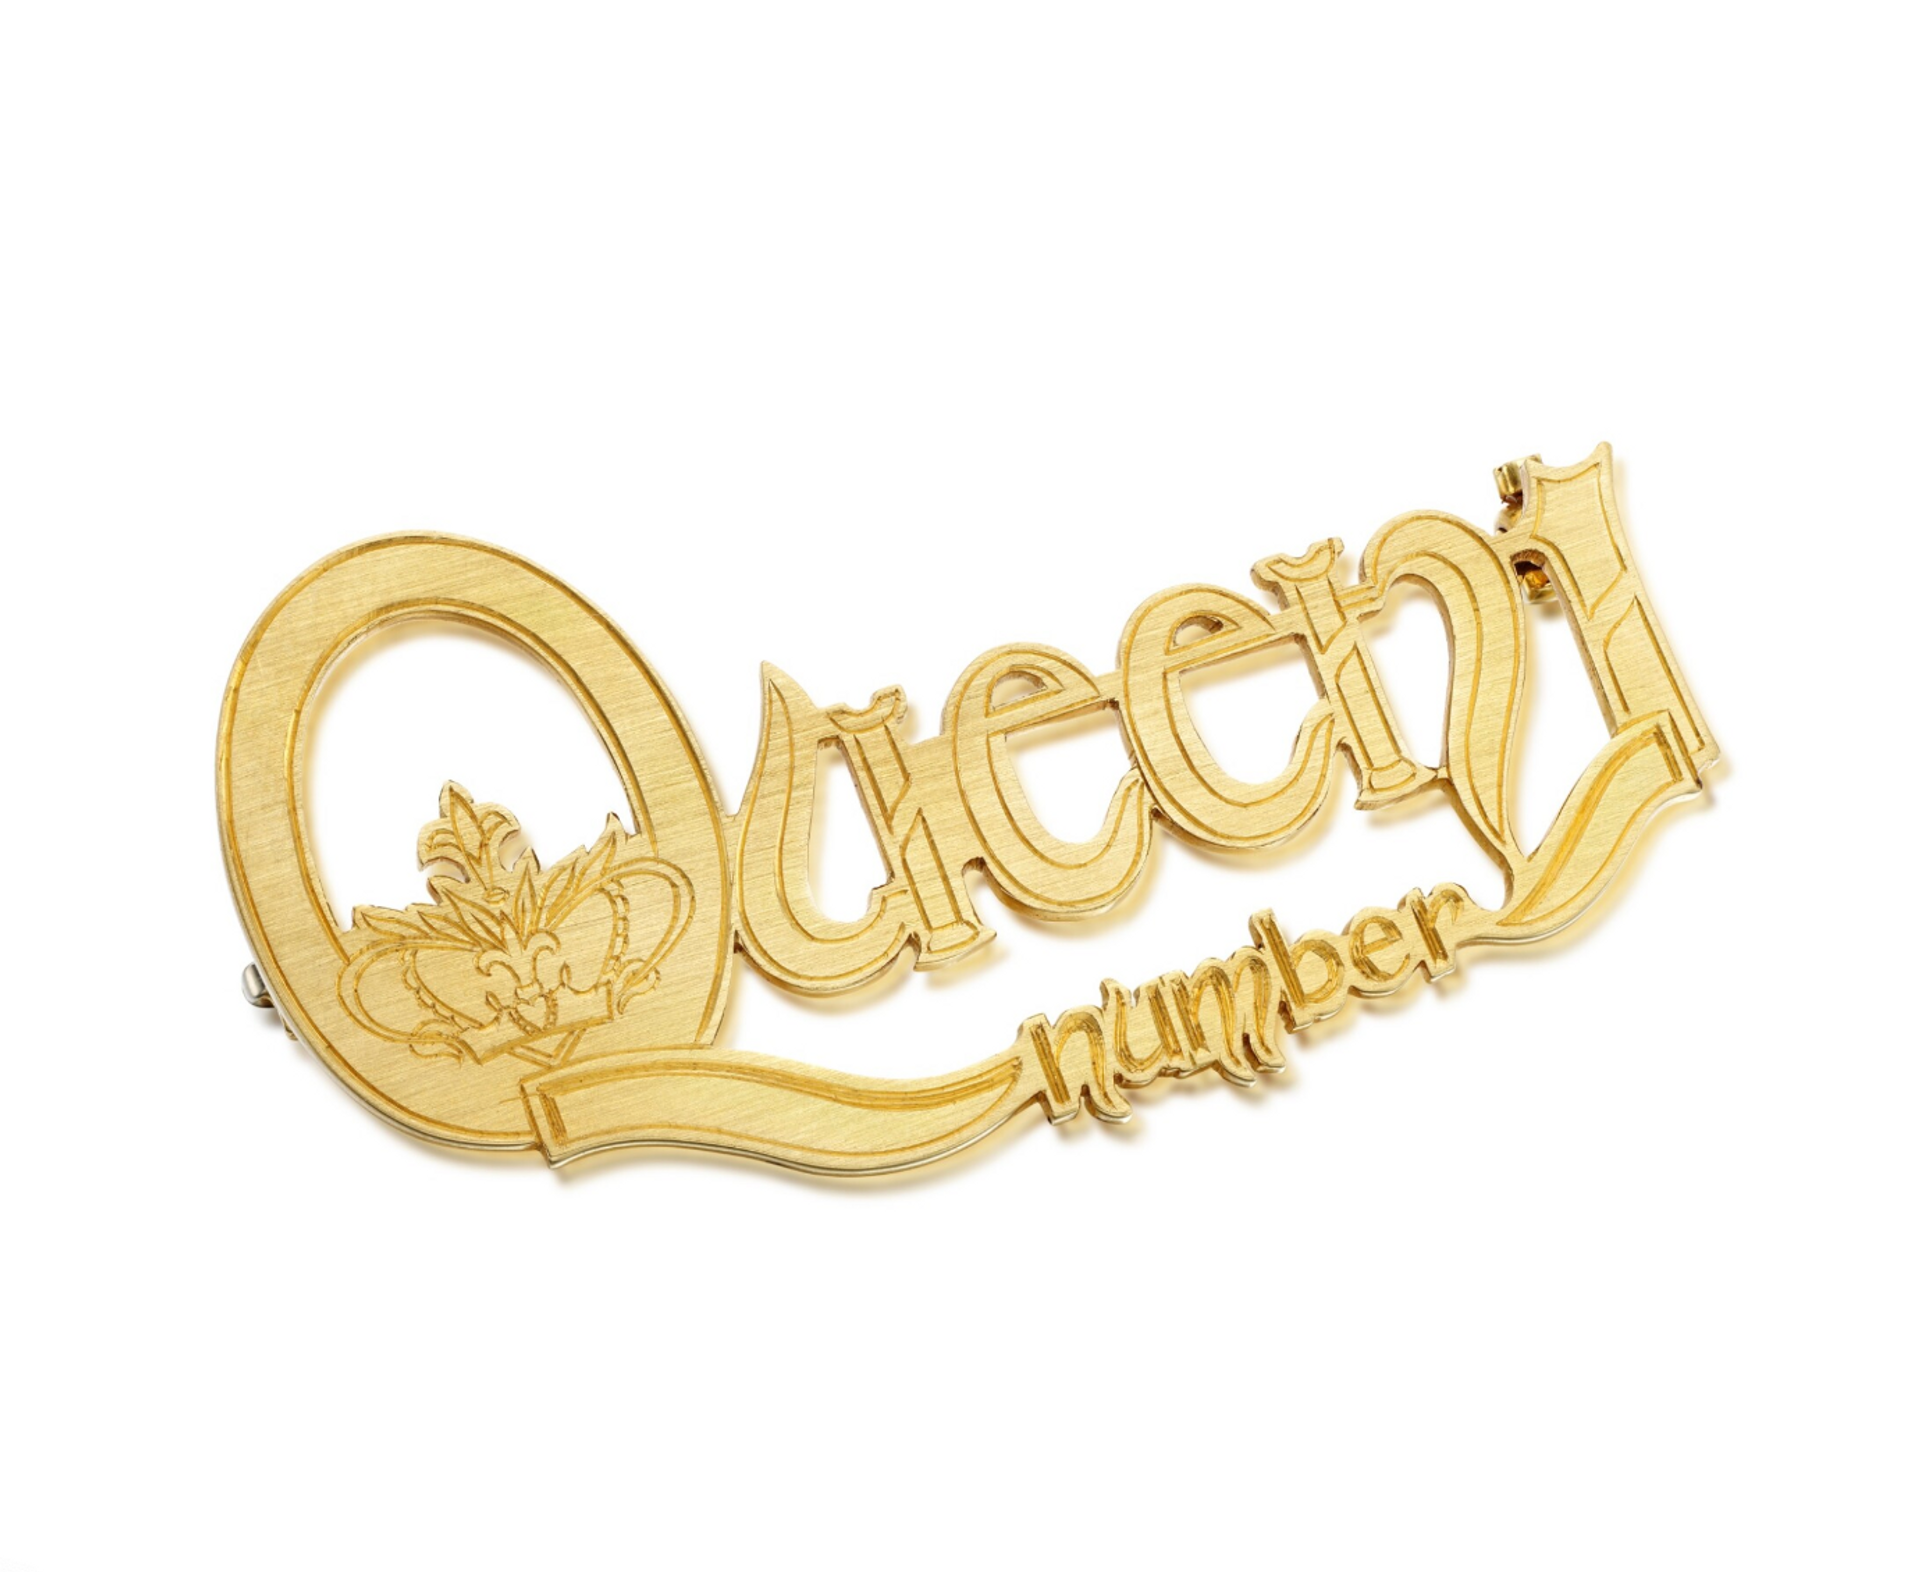 An image of a gold Cartier brooch that reads Queen number 1